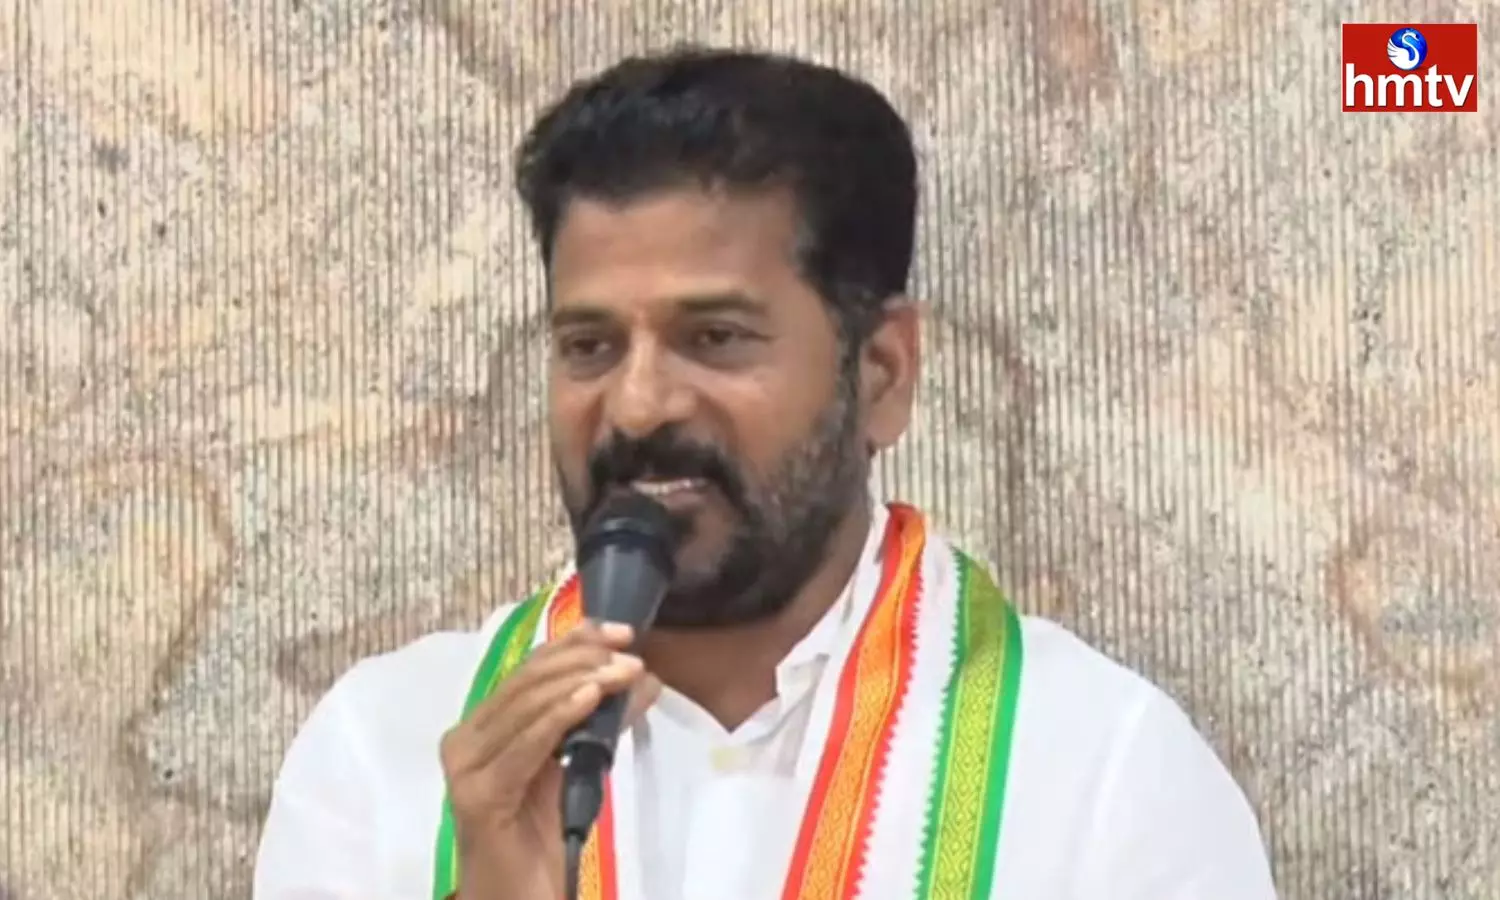 The Ongoing Meeting Was Chaired By TPCC Chief Revanth Reddy At Indira Bhavan